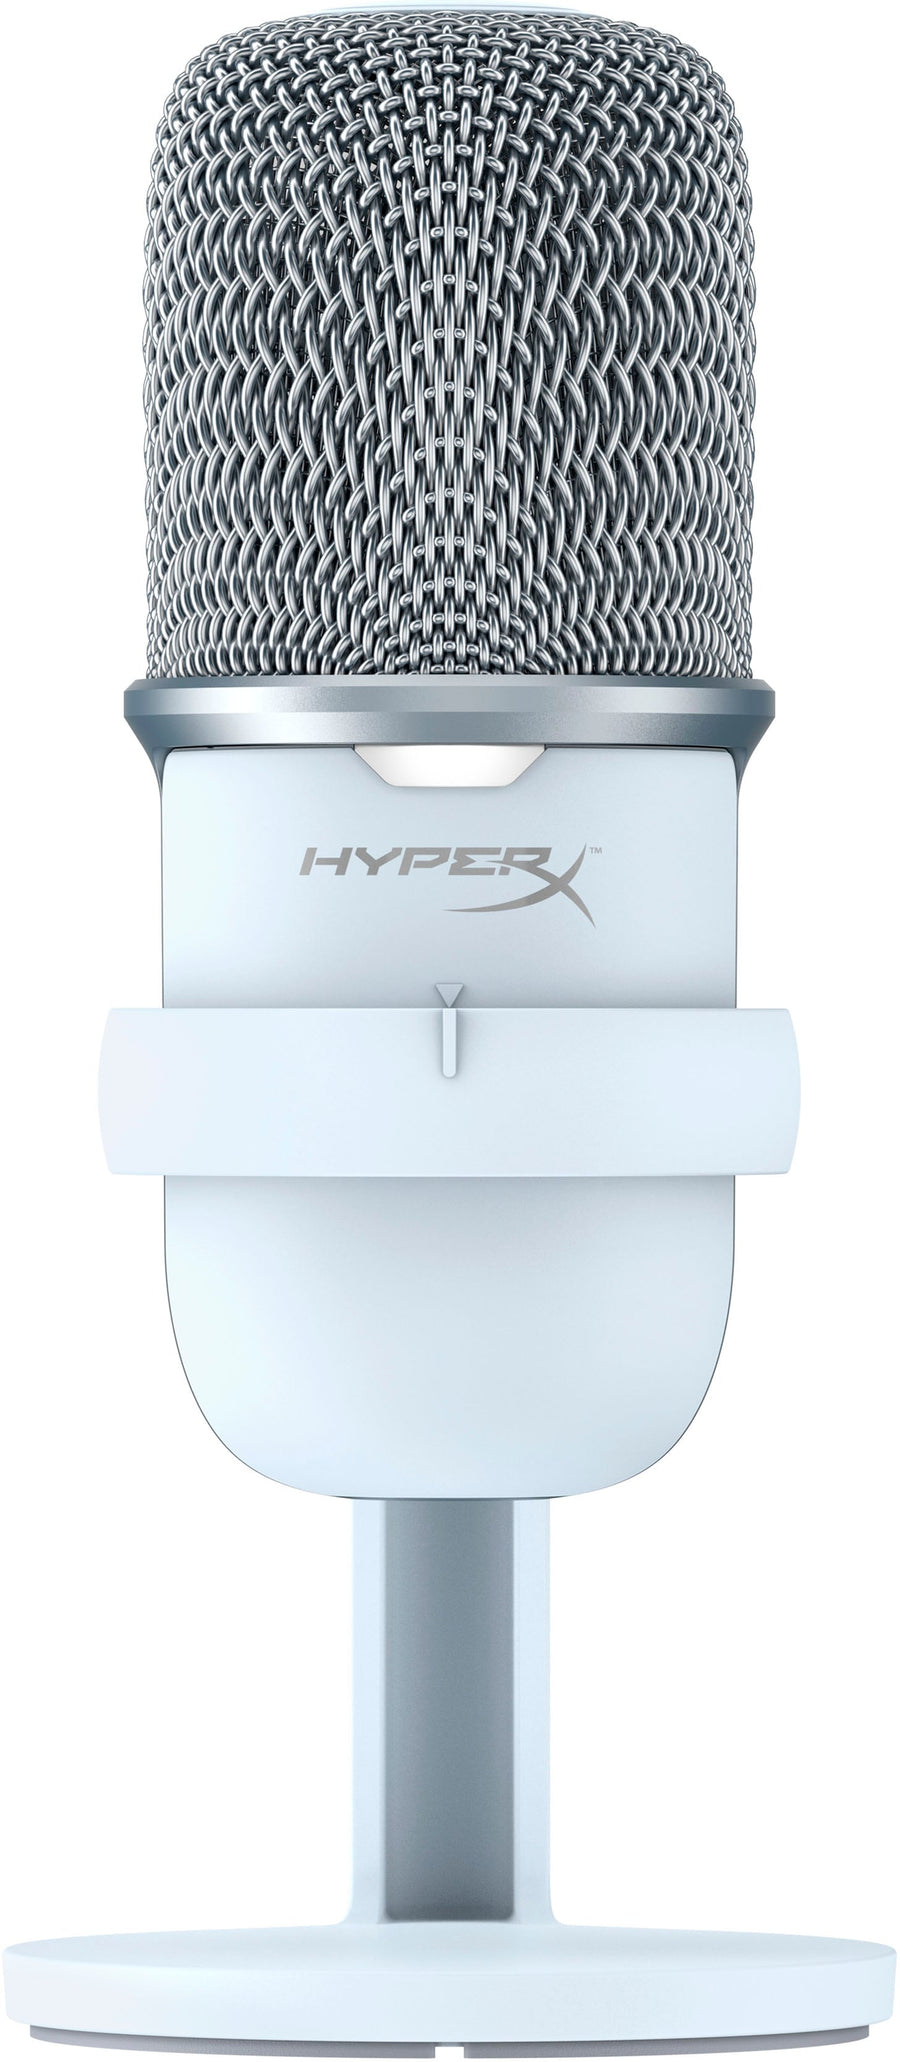 HyperX - SoloCast Wired Cardioid USB Condenser Gaming Microphone_0